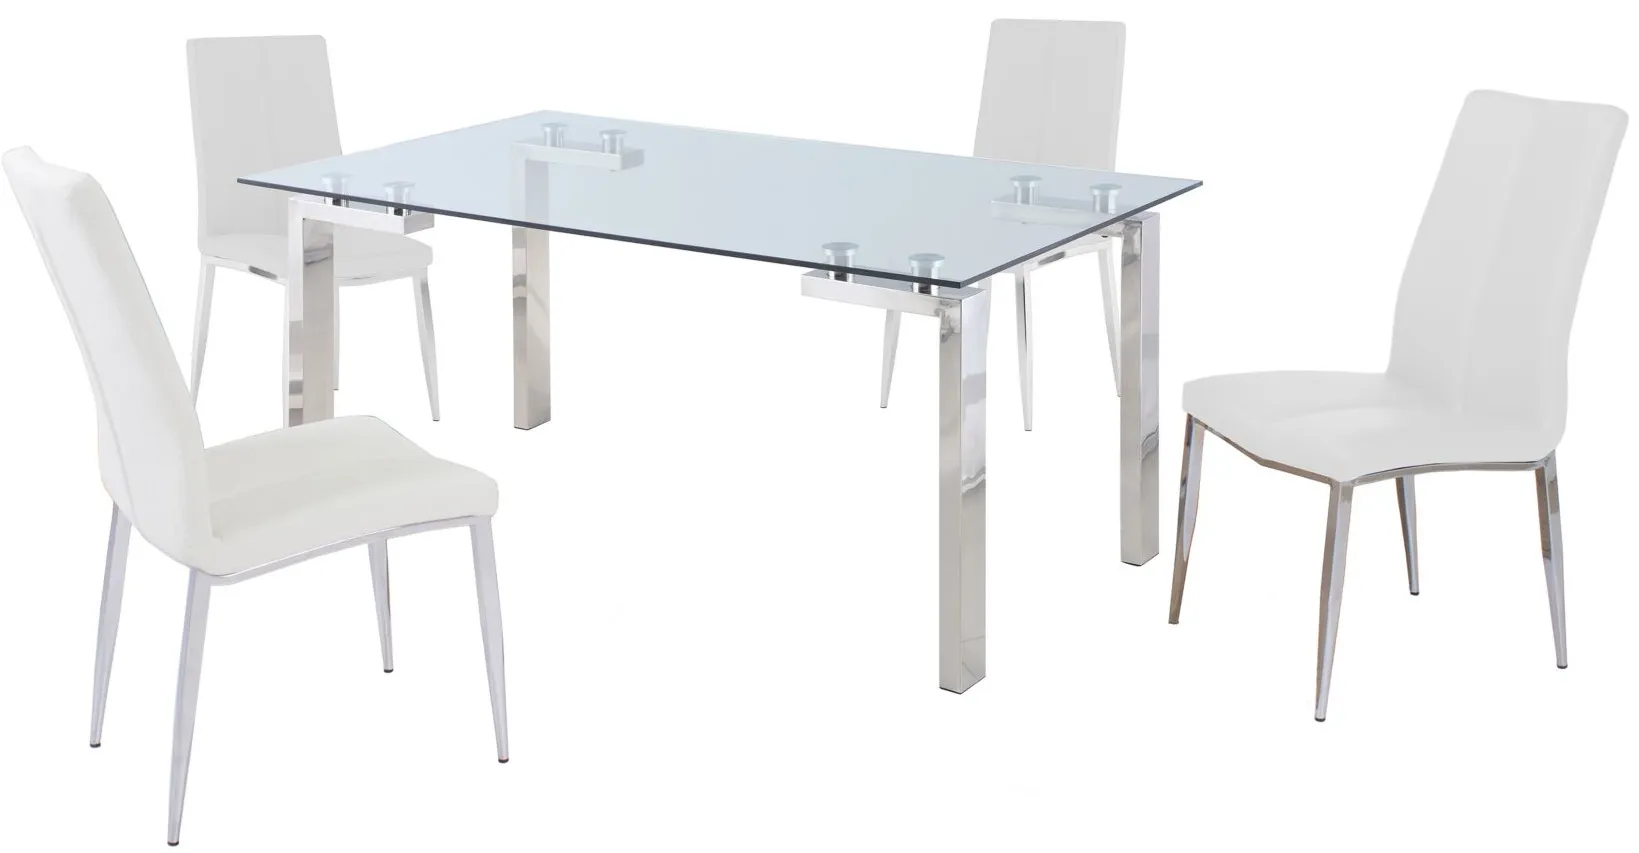 Cristina 5-pc. Dining Set in White by Chintaly Imports